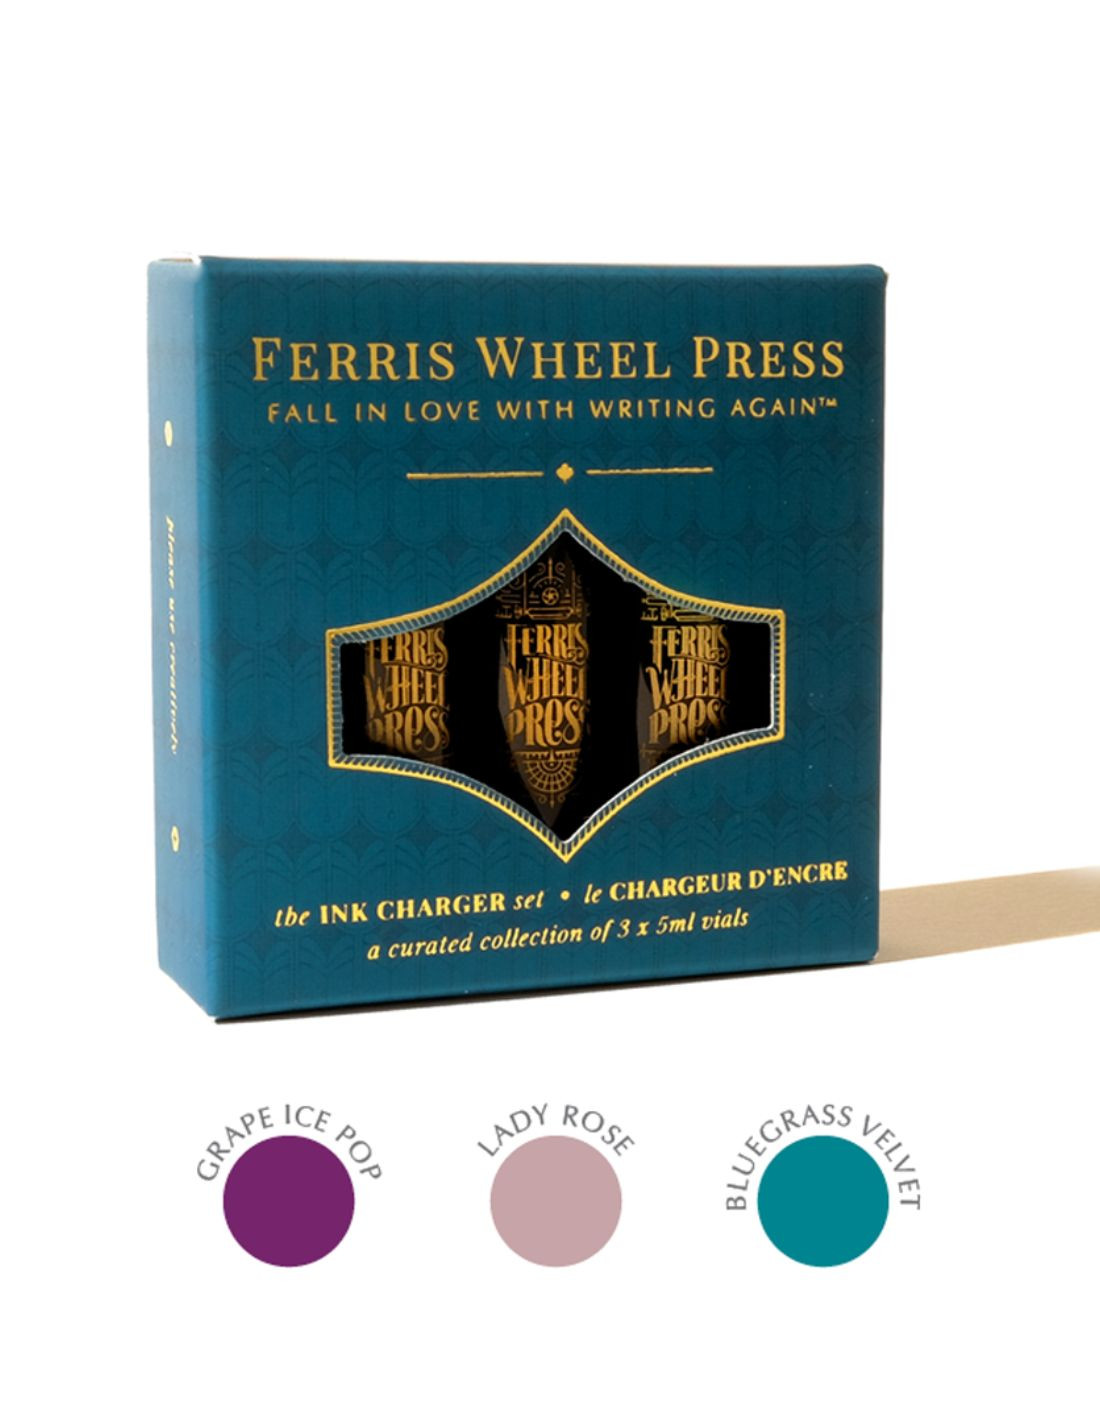 Ferris Wheel Press Ink Charger Set - The Lady Rose Trio Collection Papeterie Makkura